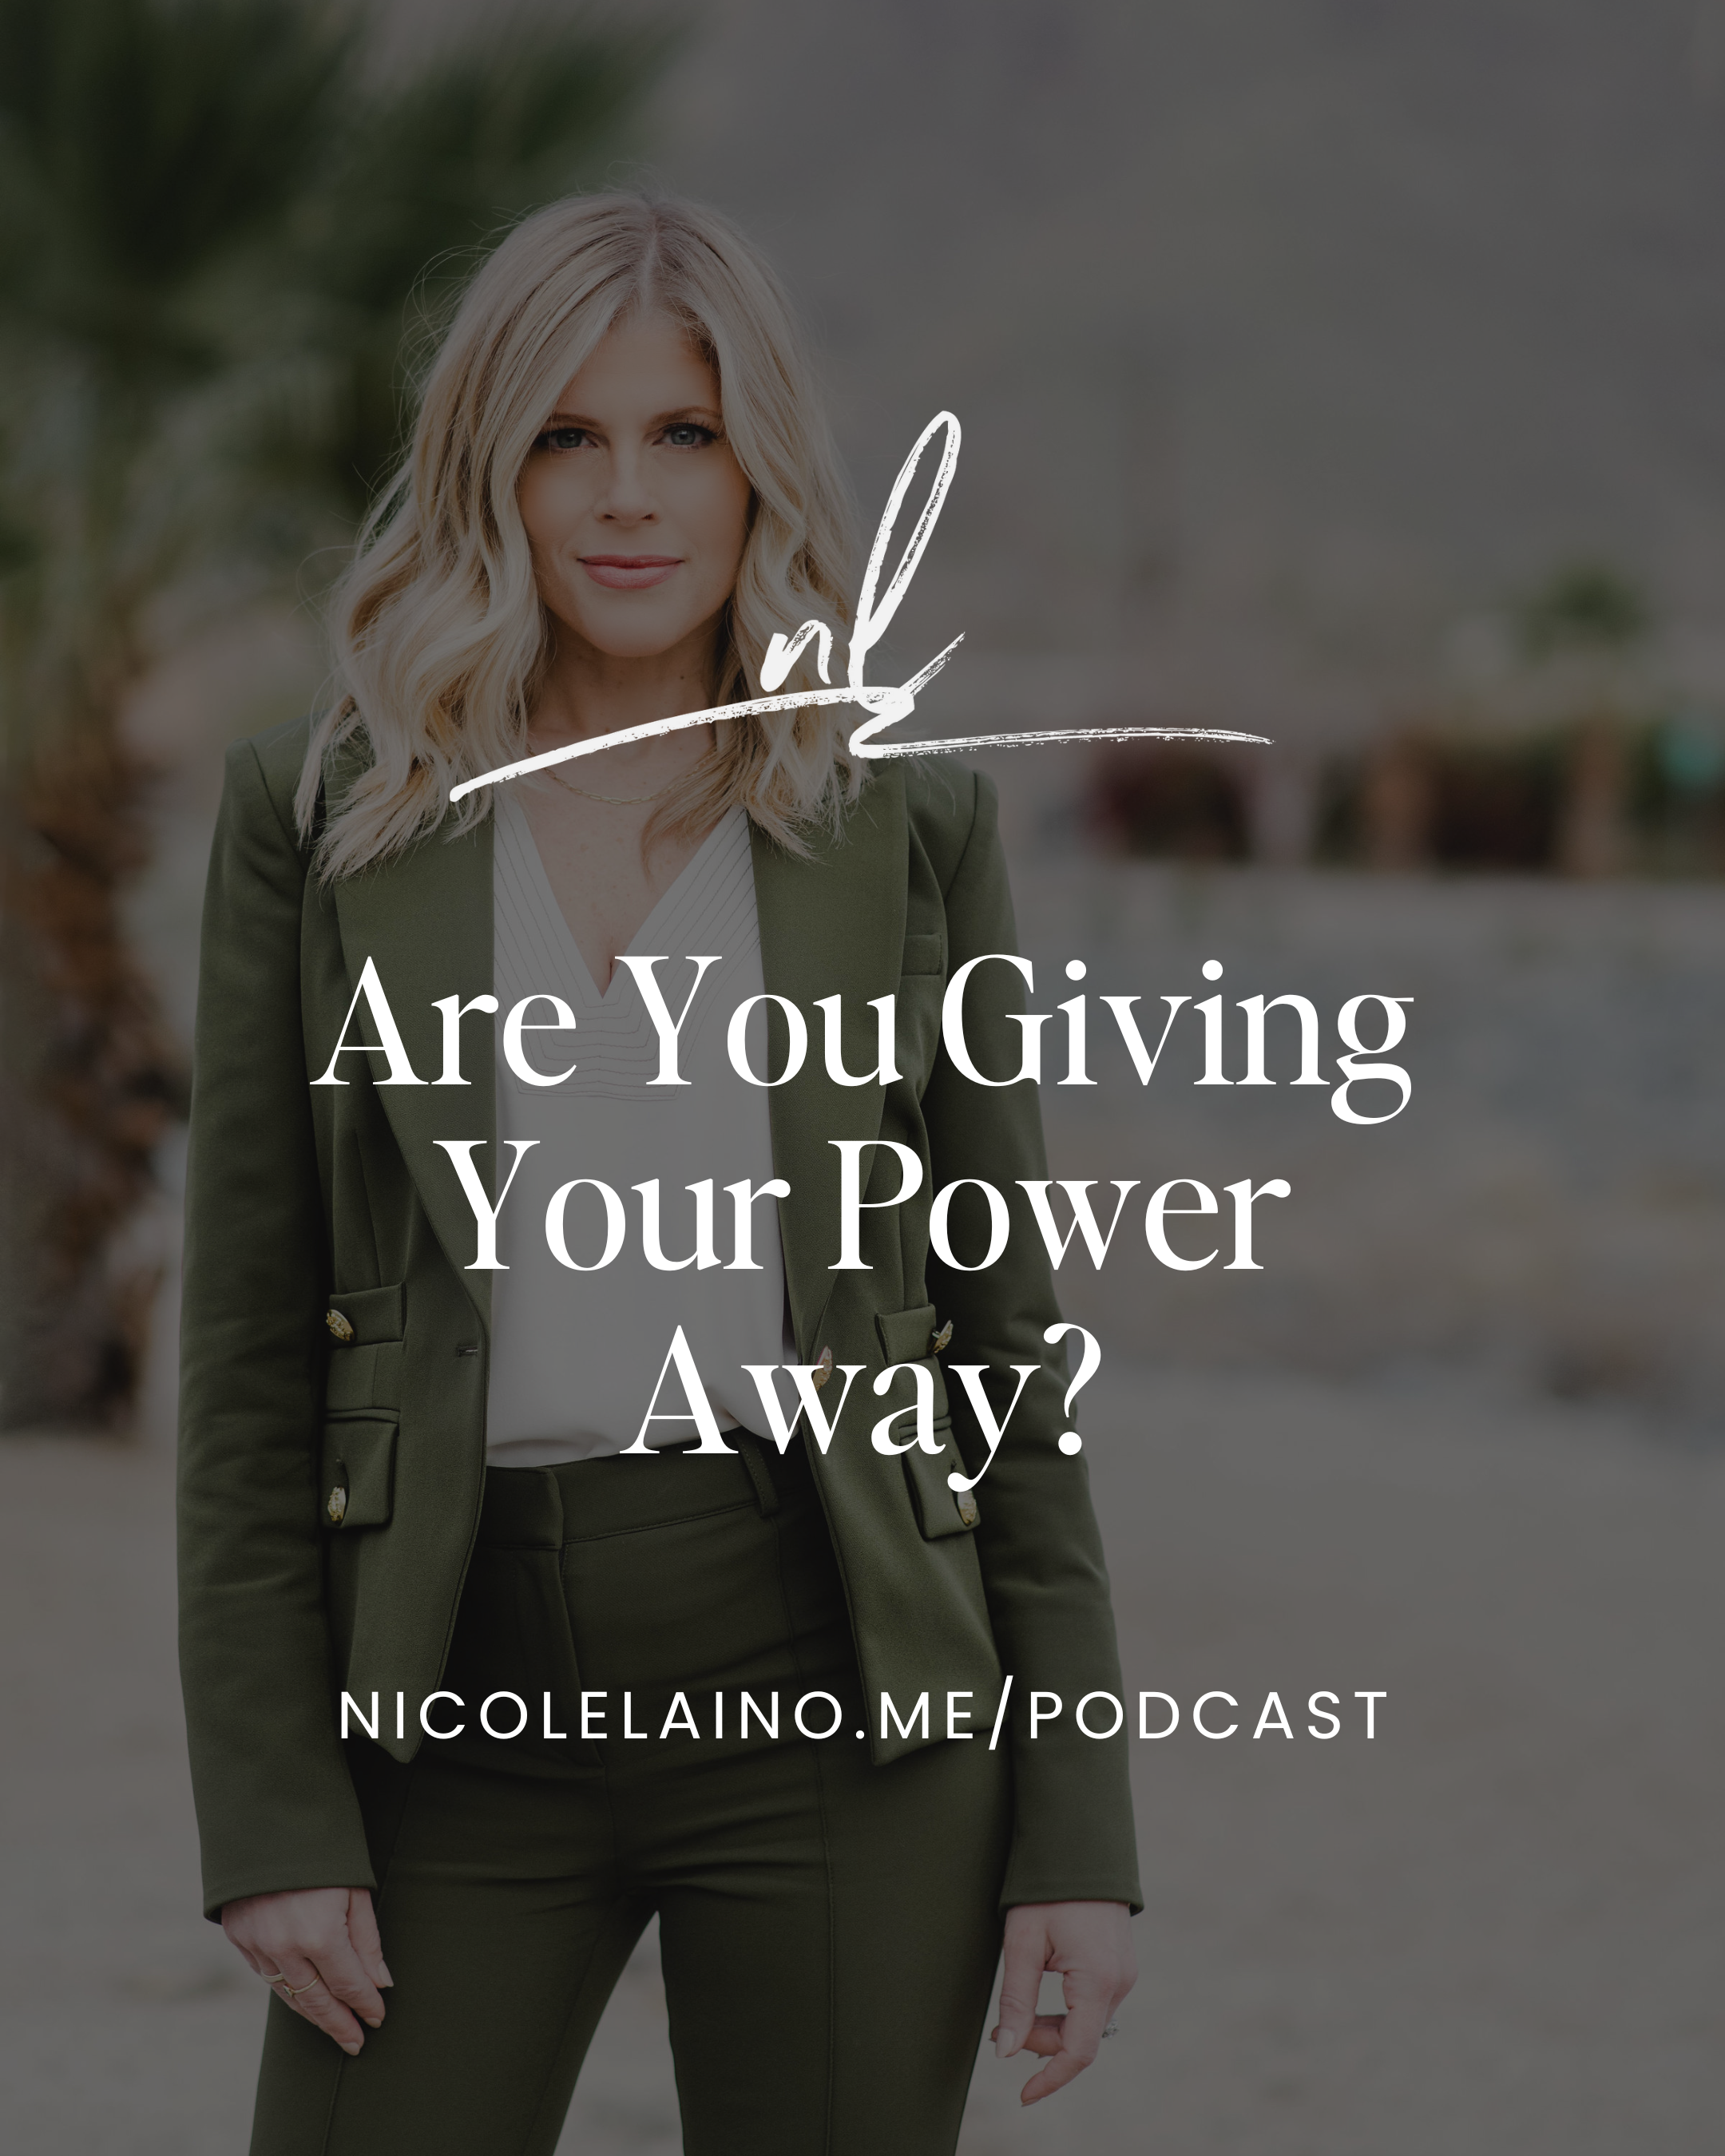 Are You Giving Your Power Away?